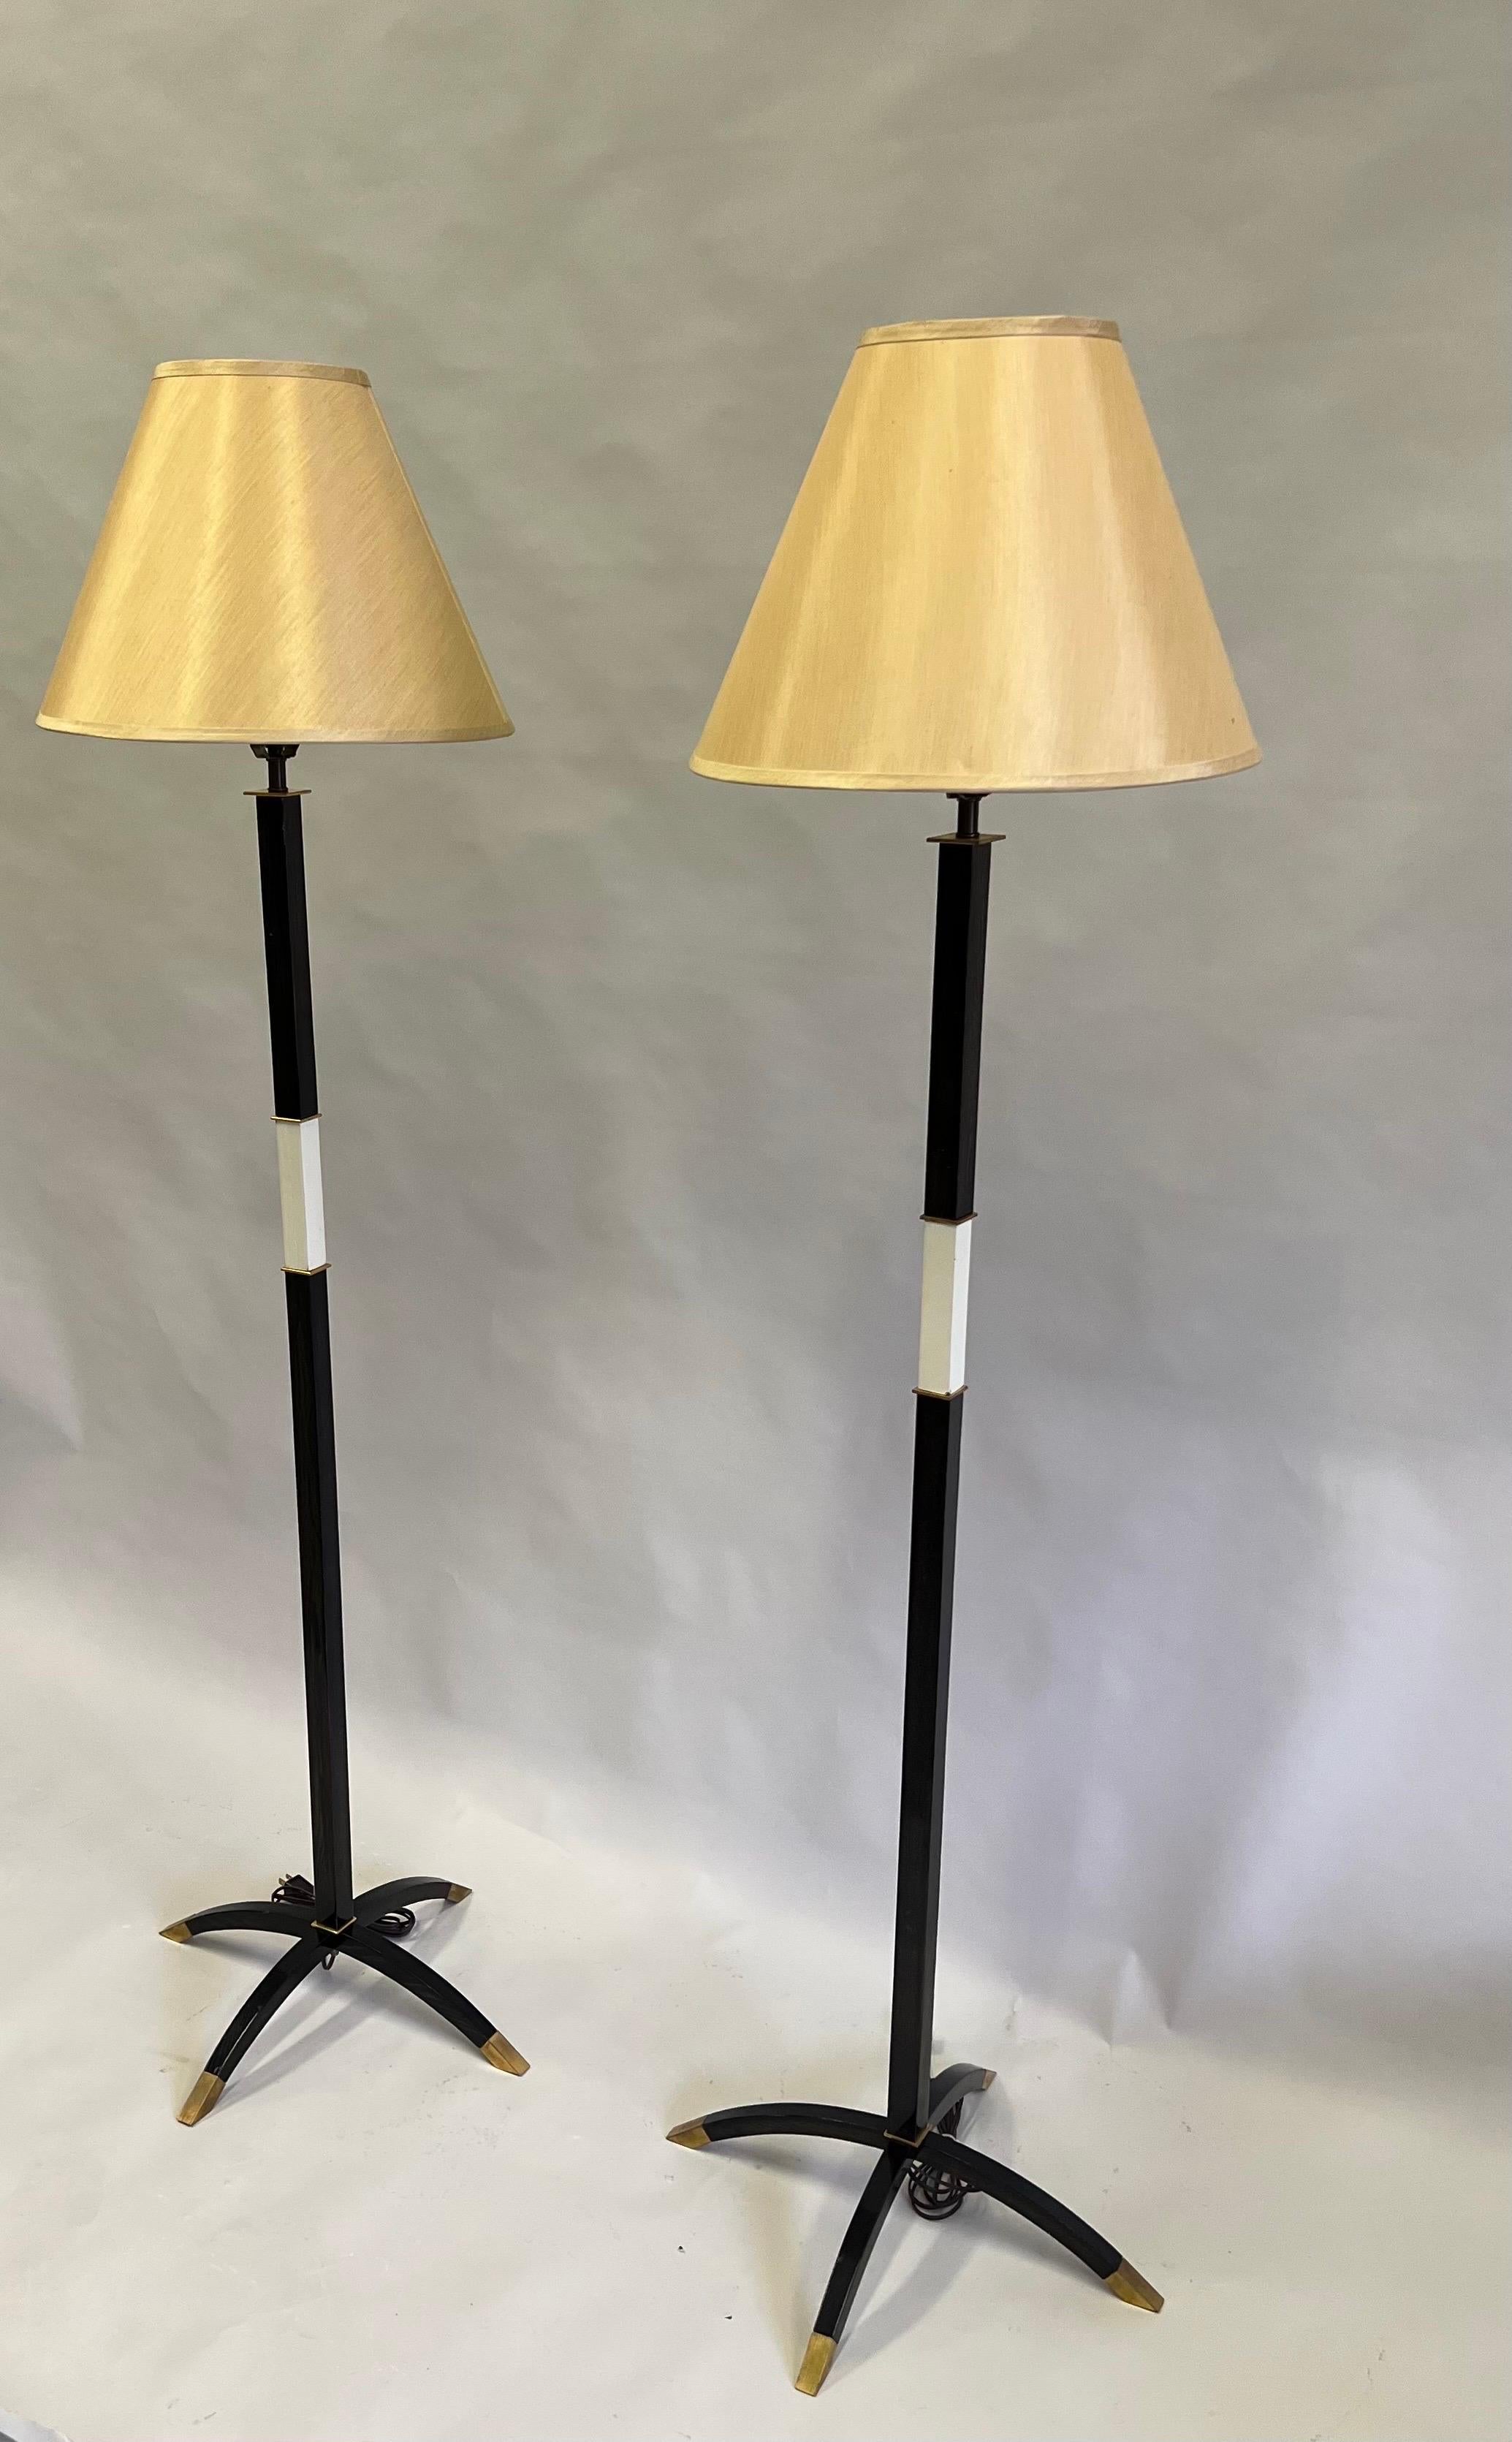 Important, Elegant pair of French late Art Deco Floor lamps by Dominique in lacquered wood with brass sabots and detailing. Shades are for demonstration purposes only. Height of base alone without shade is 54